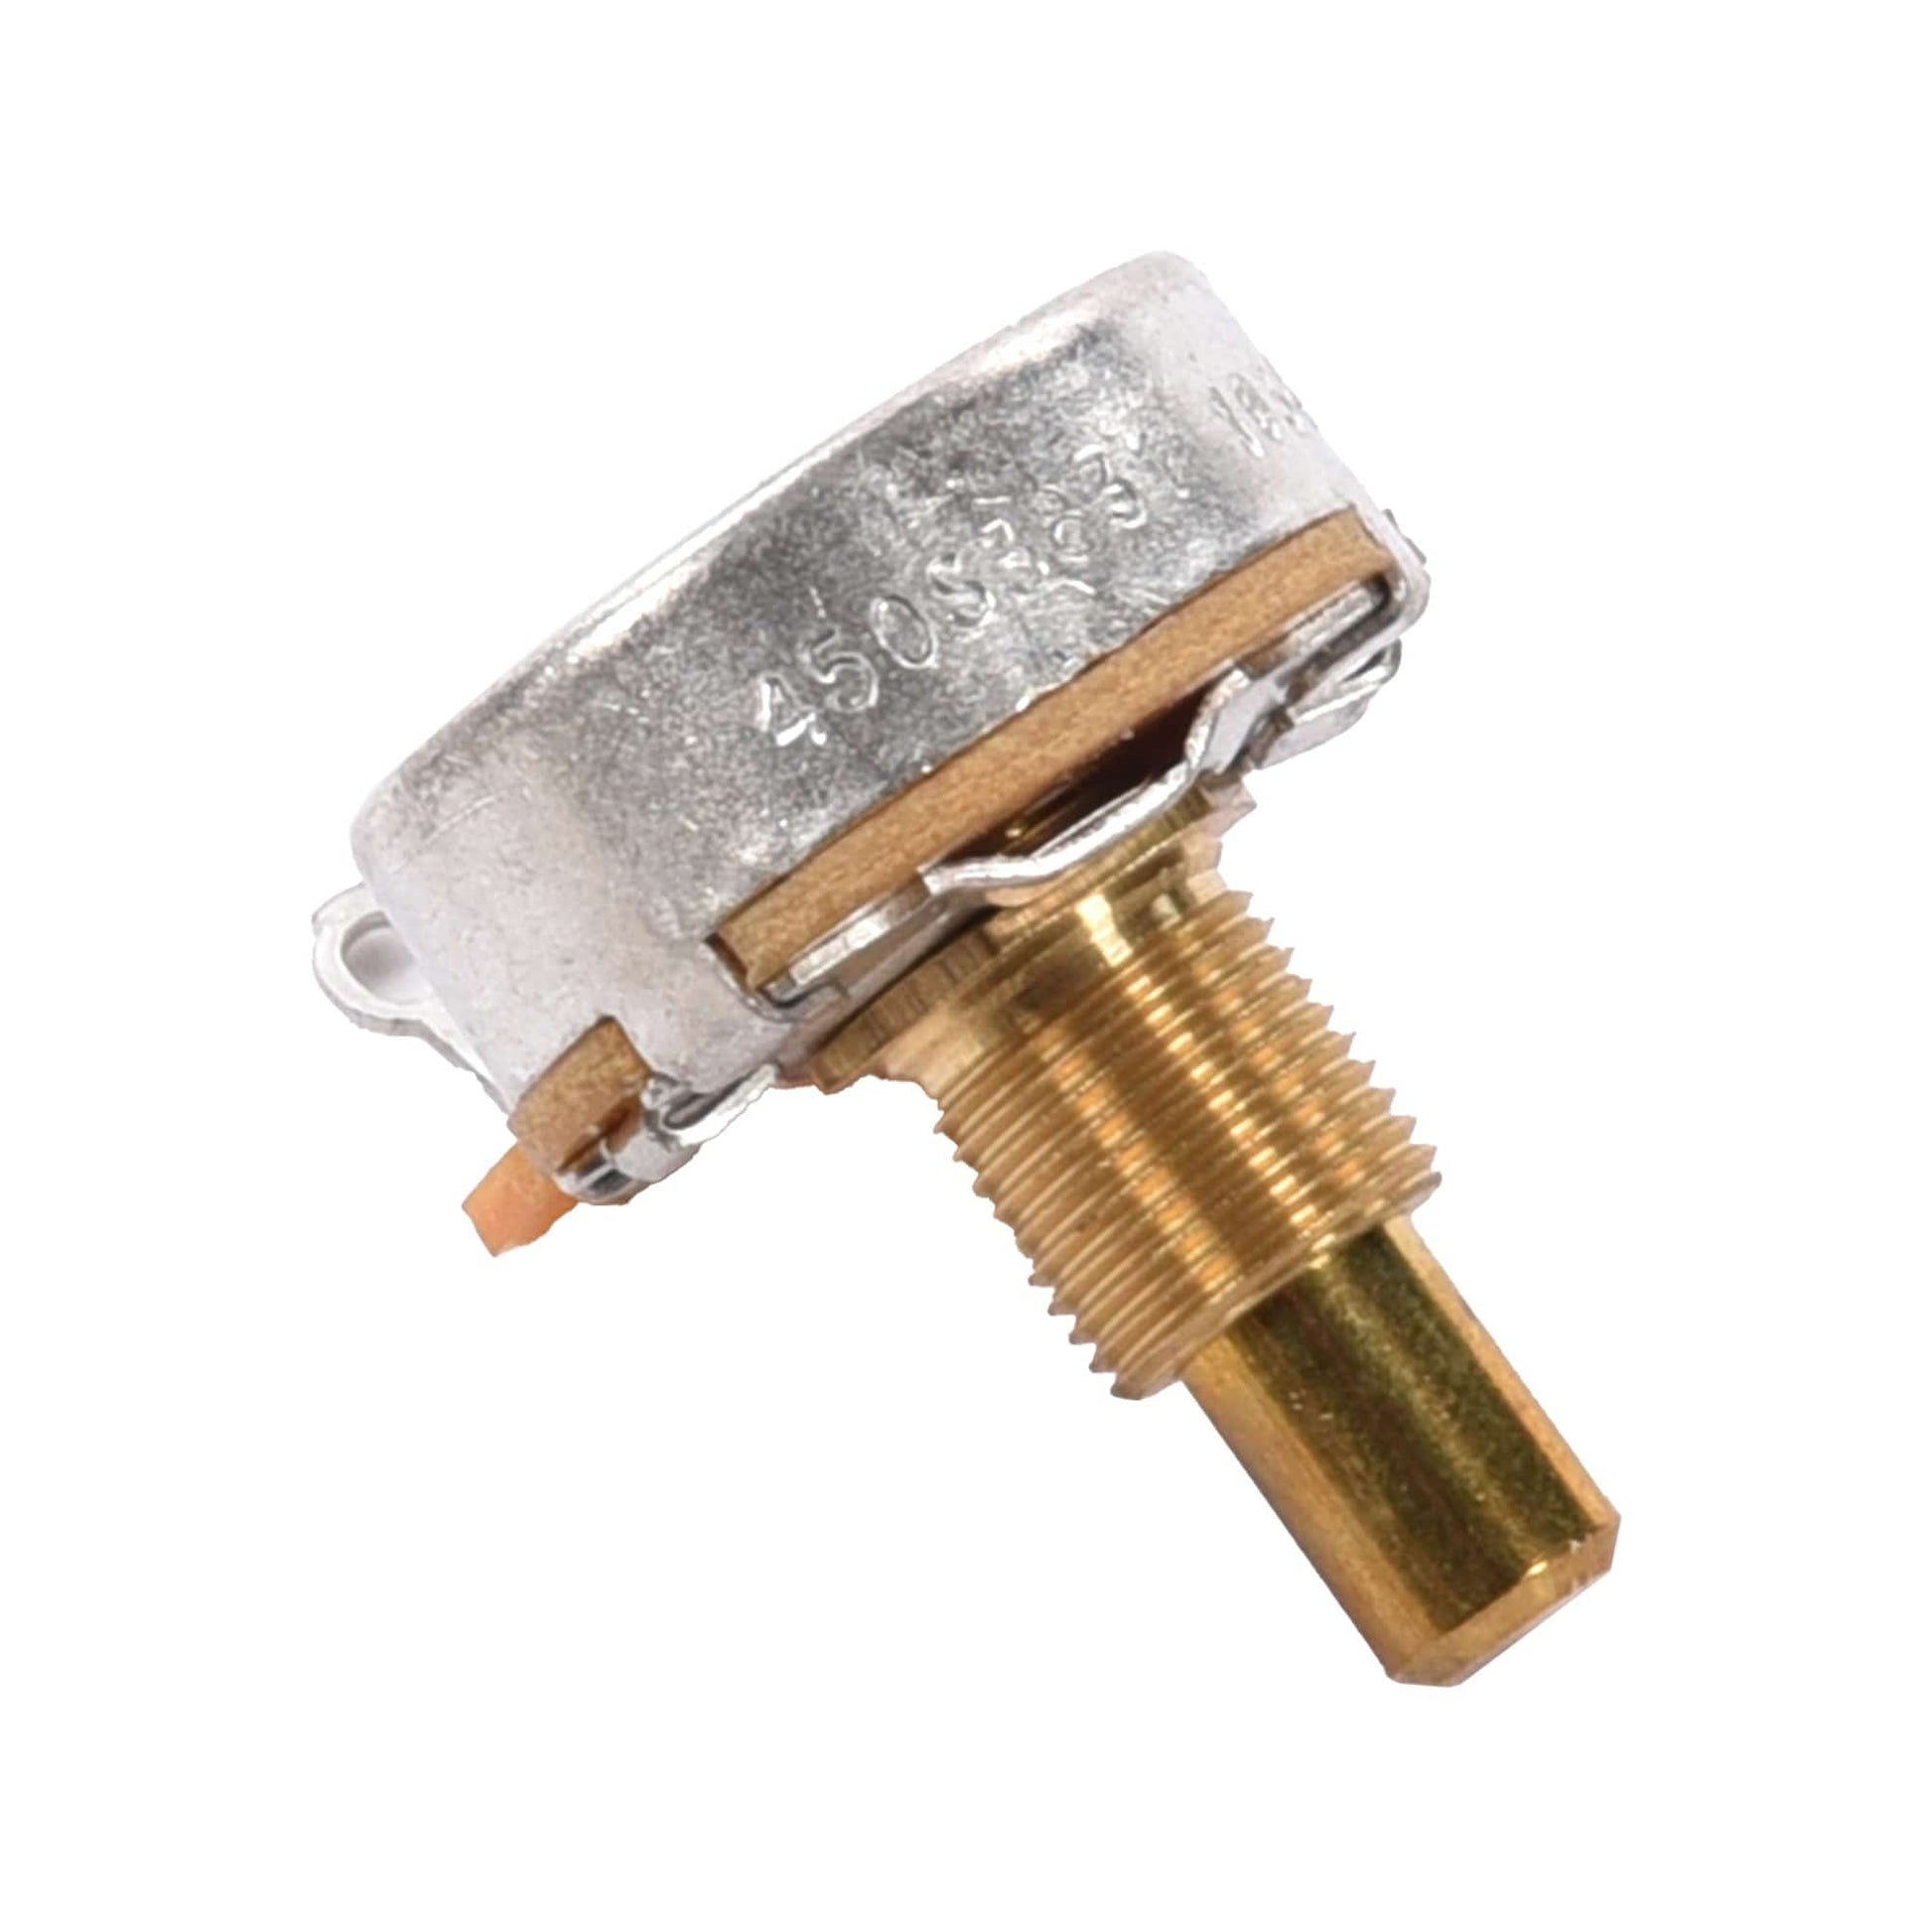 Emerson 250K-OHM CTS Audio Taper 0.375" Short Solid Shaft Pro Potentiometer (+/- 8% Tol)